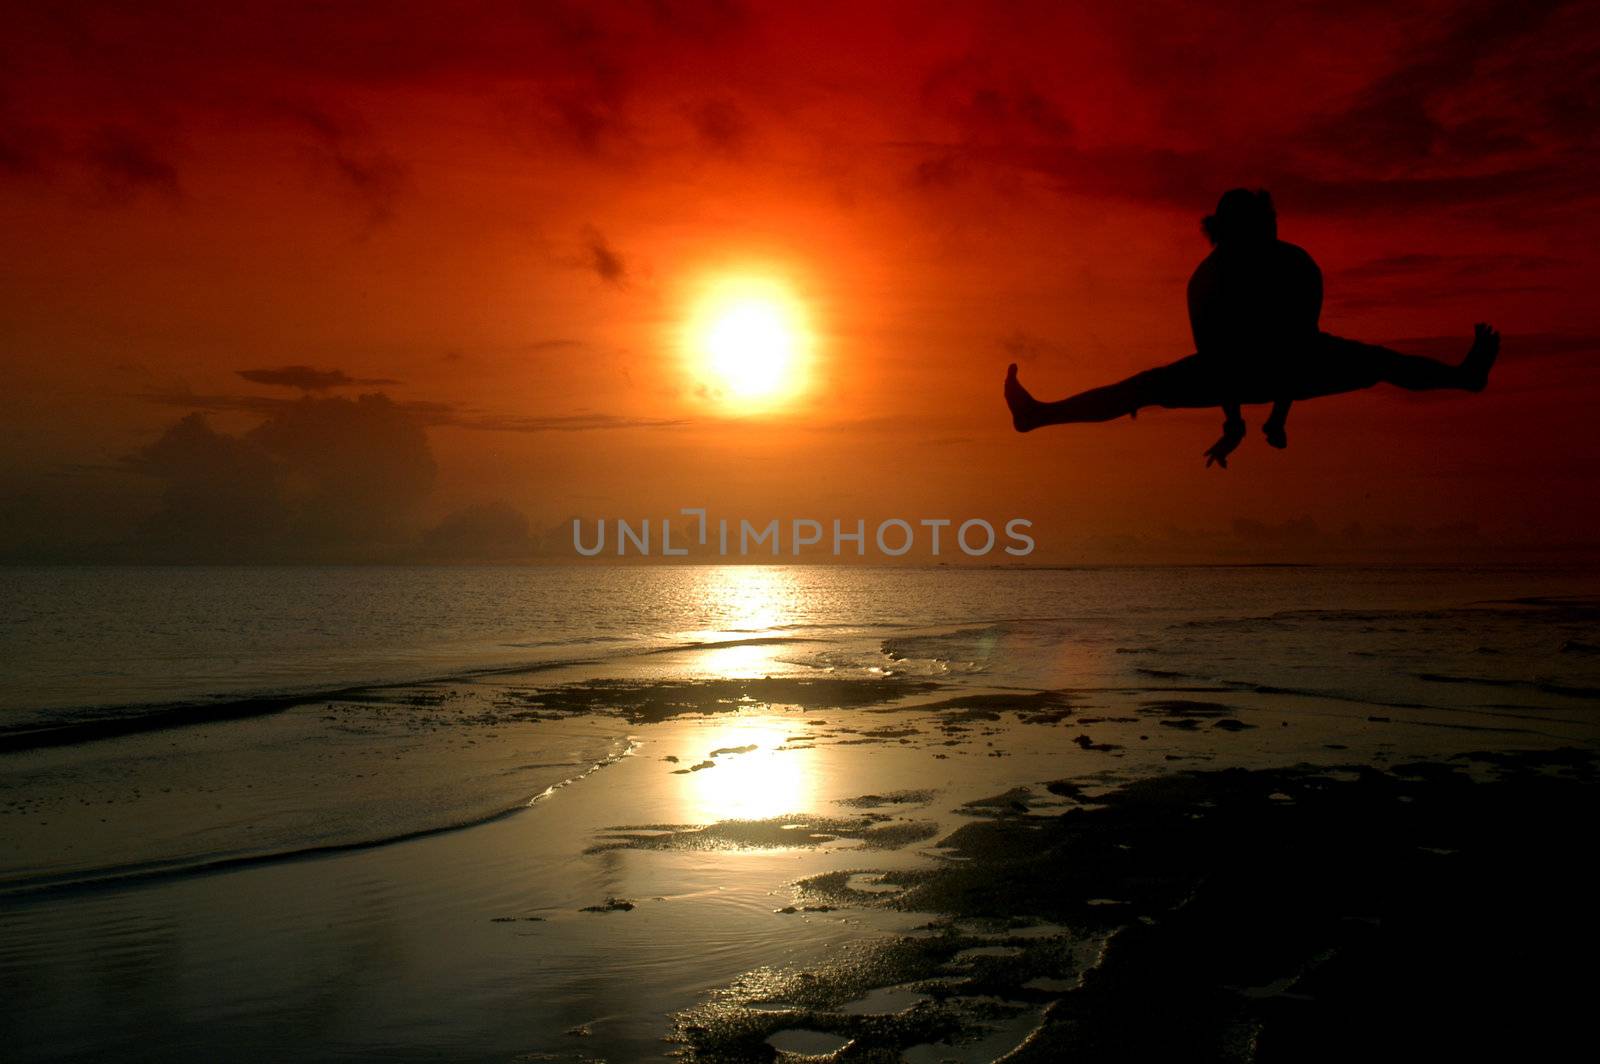 silhouette of a man jumping with sunrise baground by antonihalim